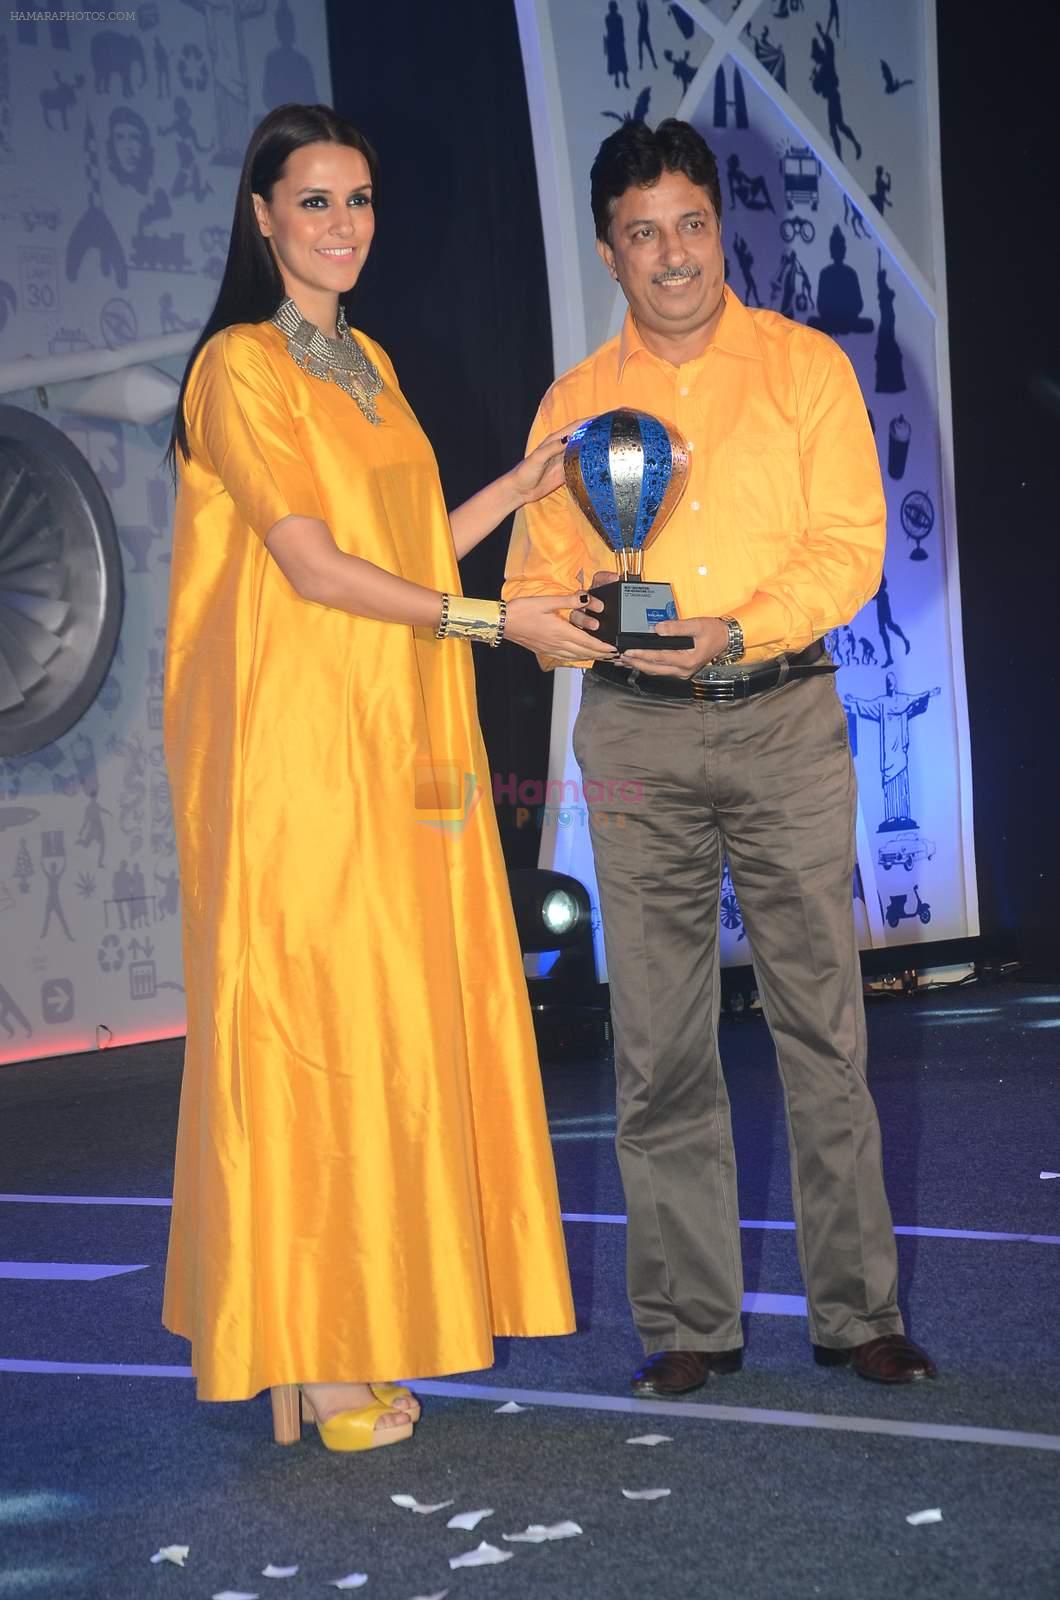 Neha Dhupia at Lonely Planet India Awards in J W Marriott on 22nd June 2015